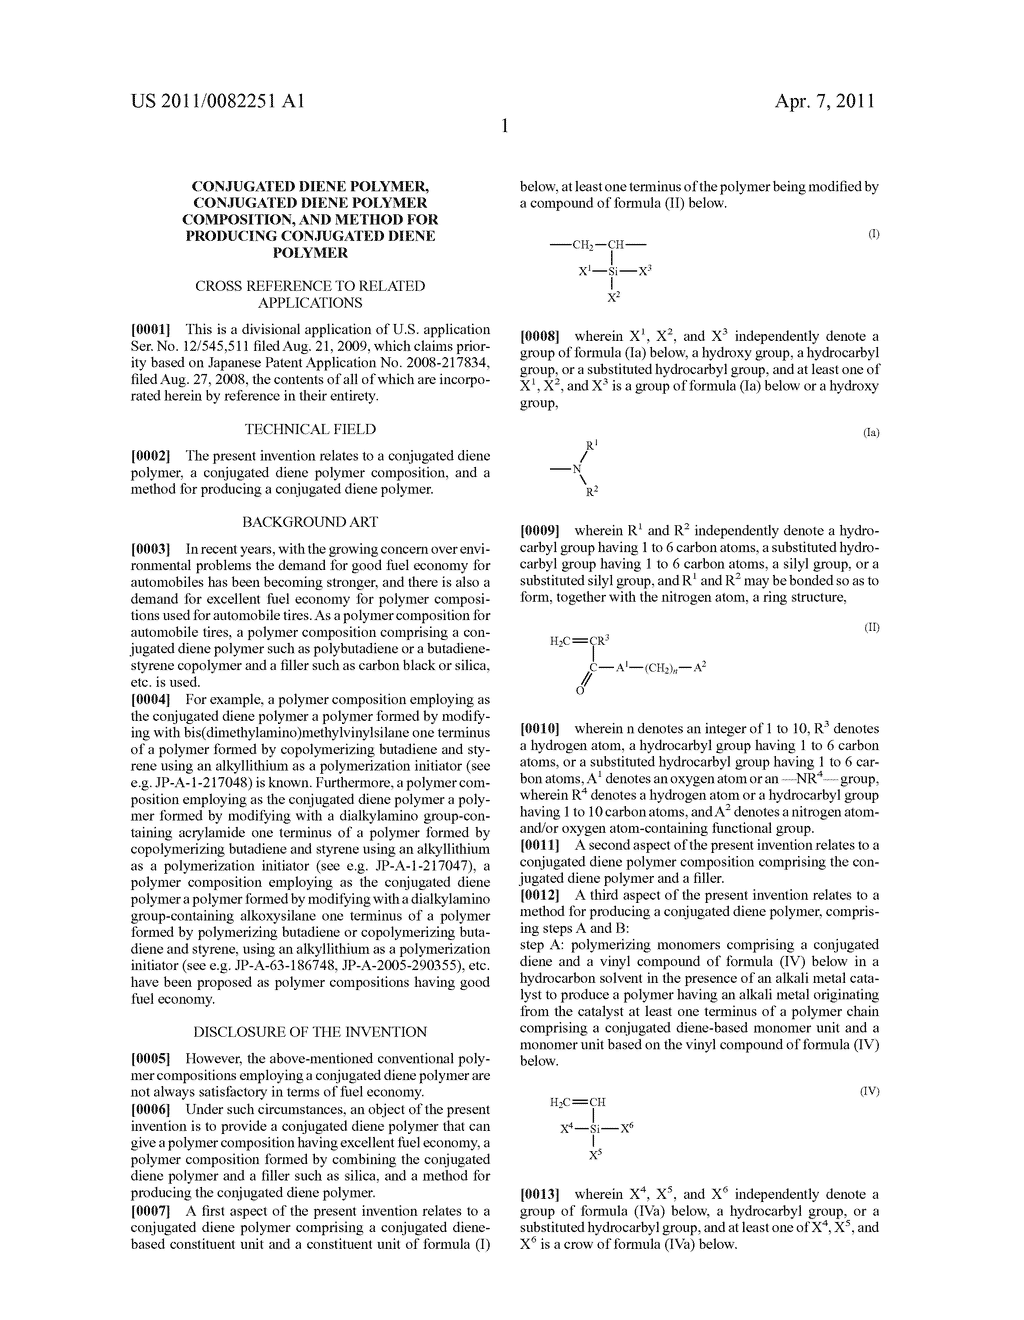 CONJUGATED DIENE POLYMER, CONJUGATED DIENE POLYMER COMPOSITION, AND METHOD FOR PRODUCING CONJUGATED DIENE POLYMER - diagram, schematic, and image 02